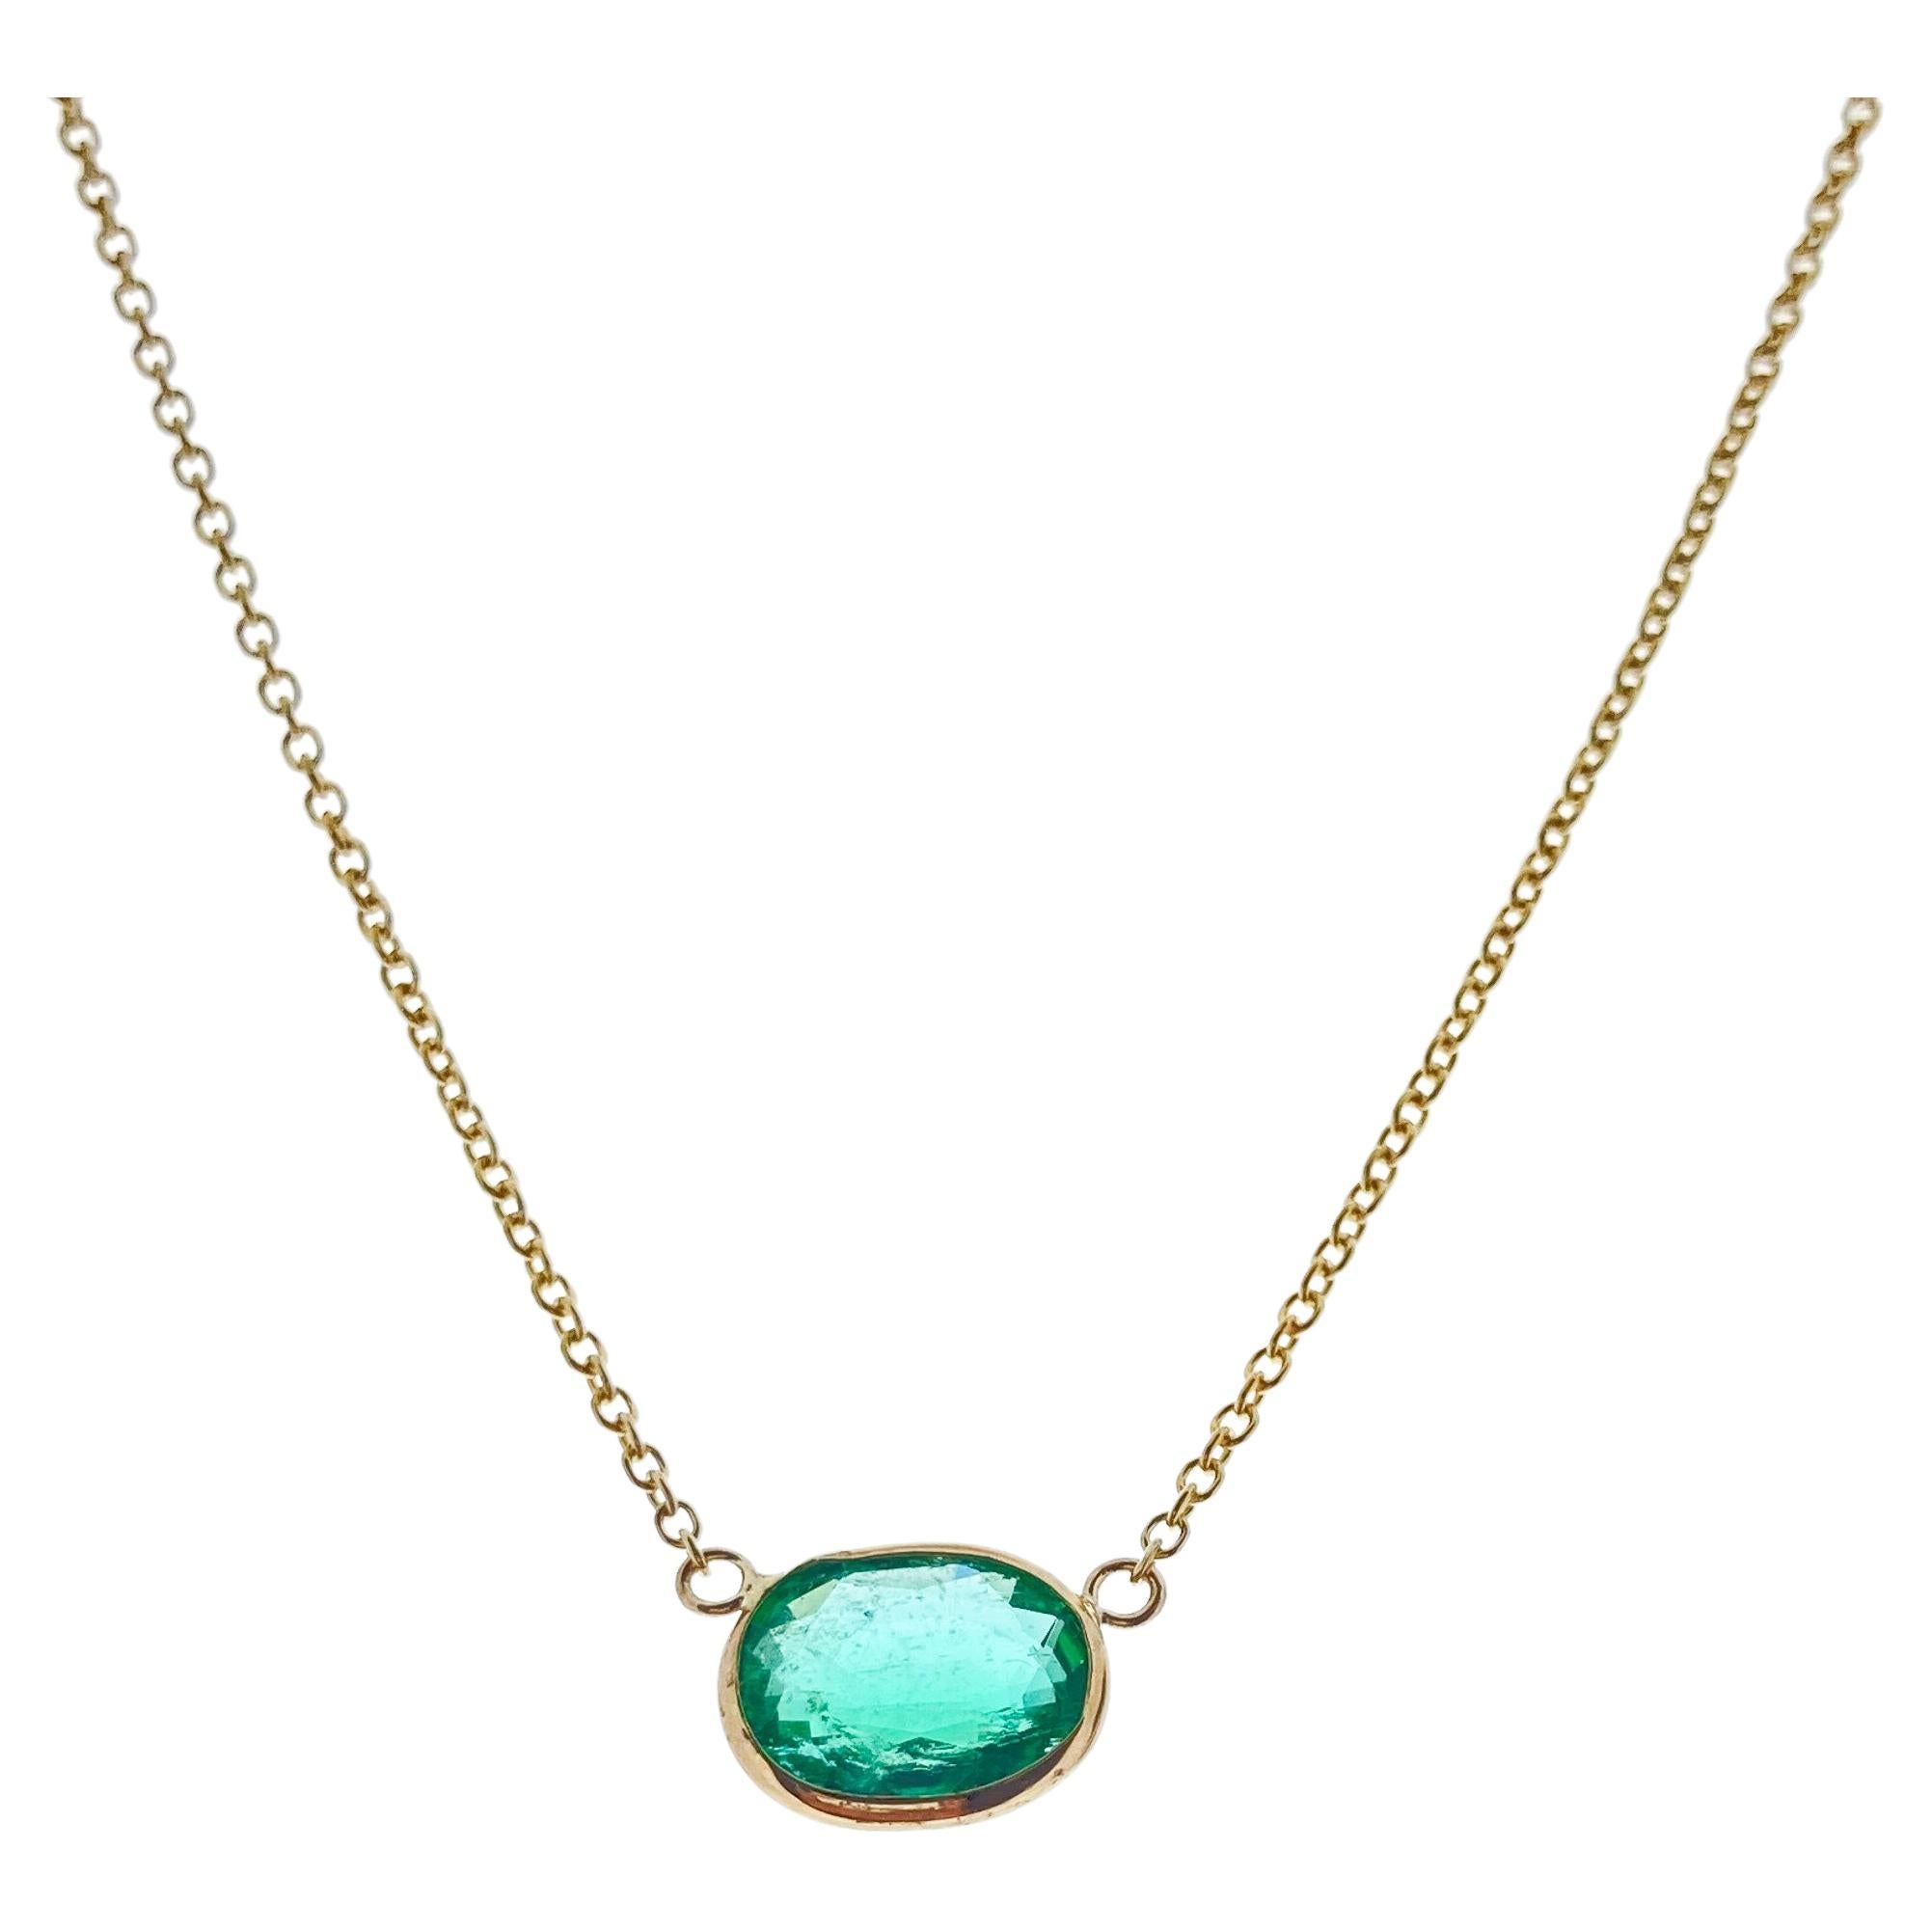 1.67 Carat Green Emerald Oval Cut Fashion Necklaces In 14K Yellow Gold For Sale